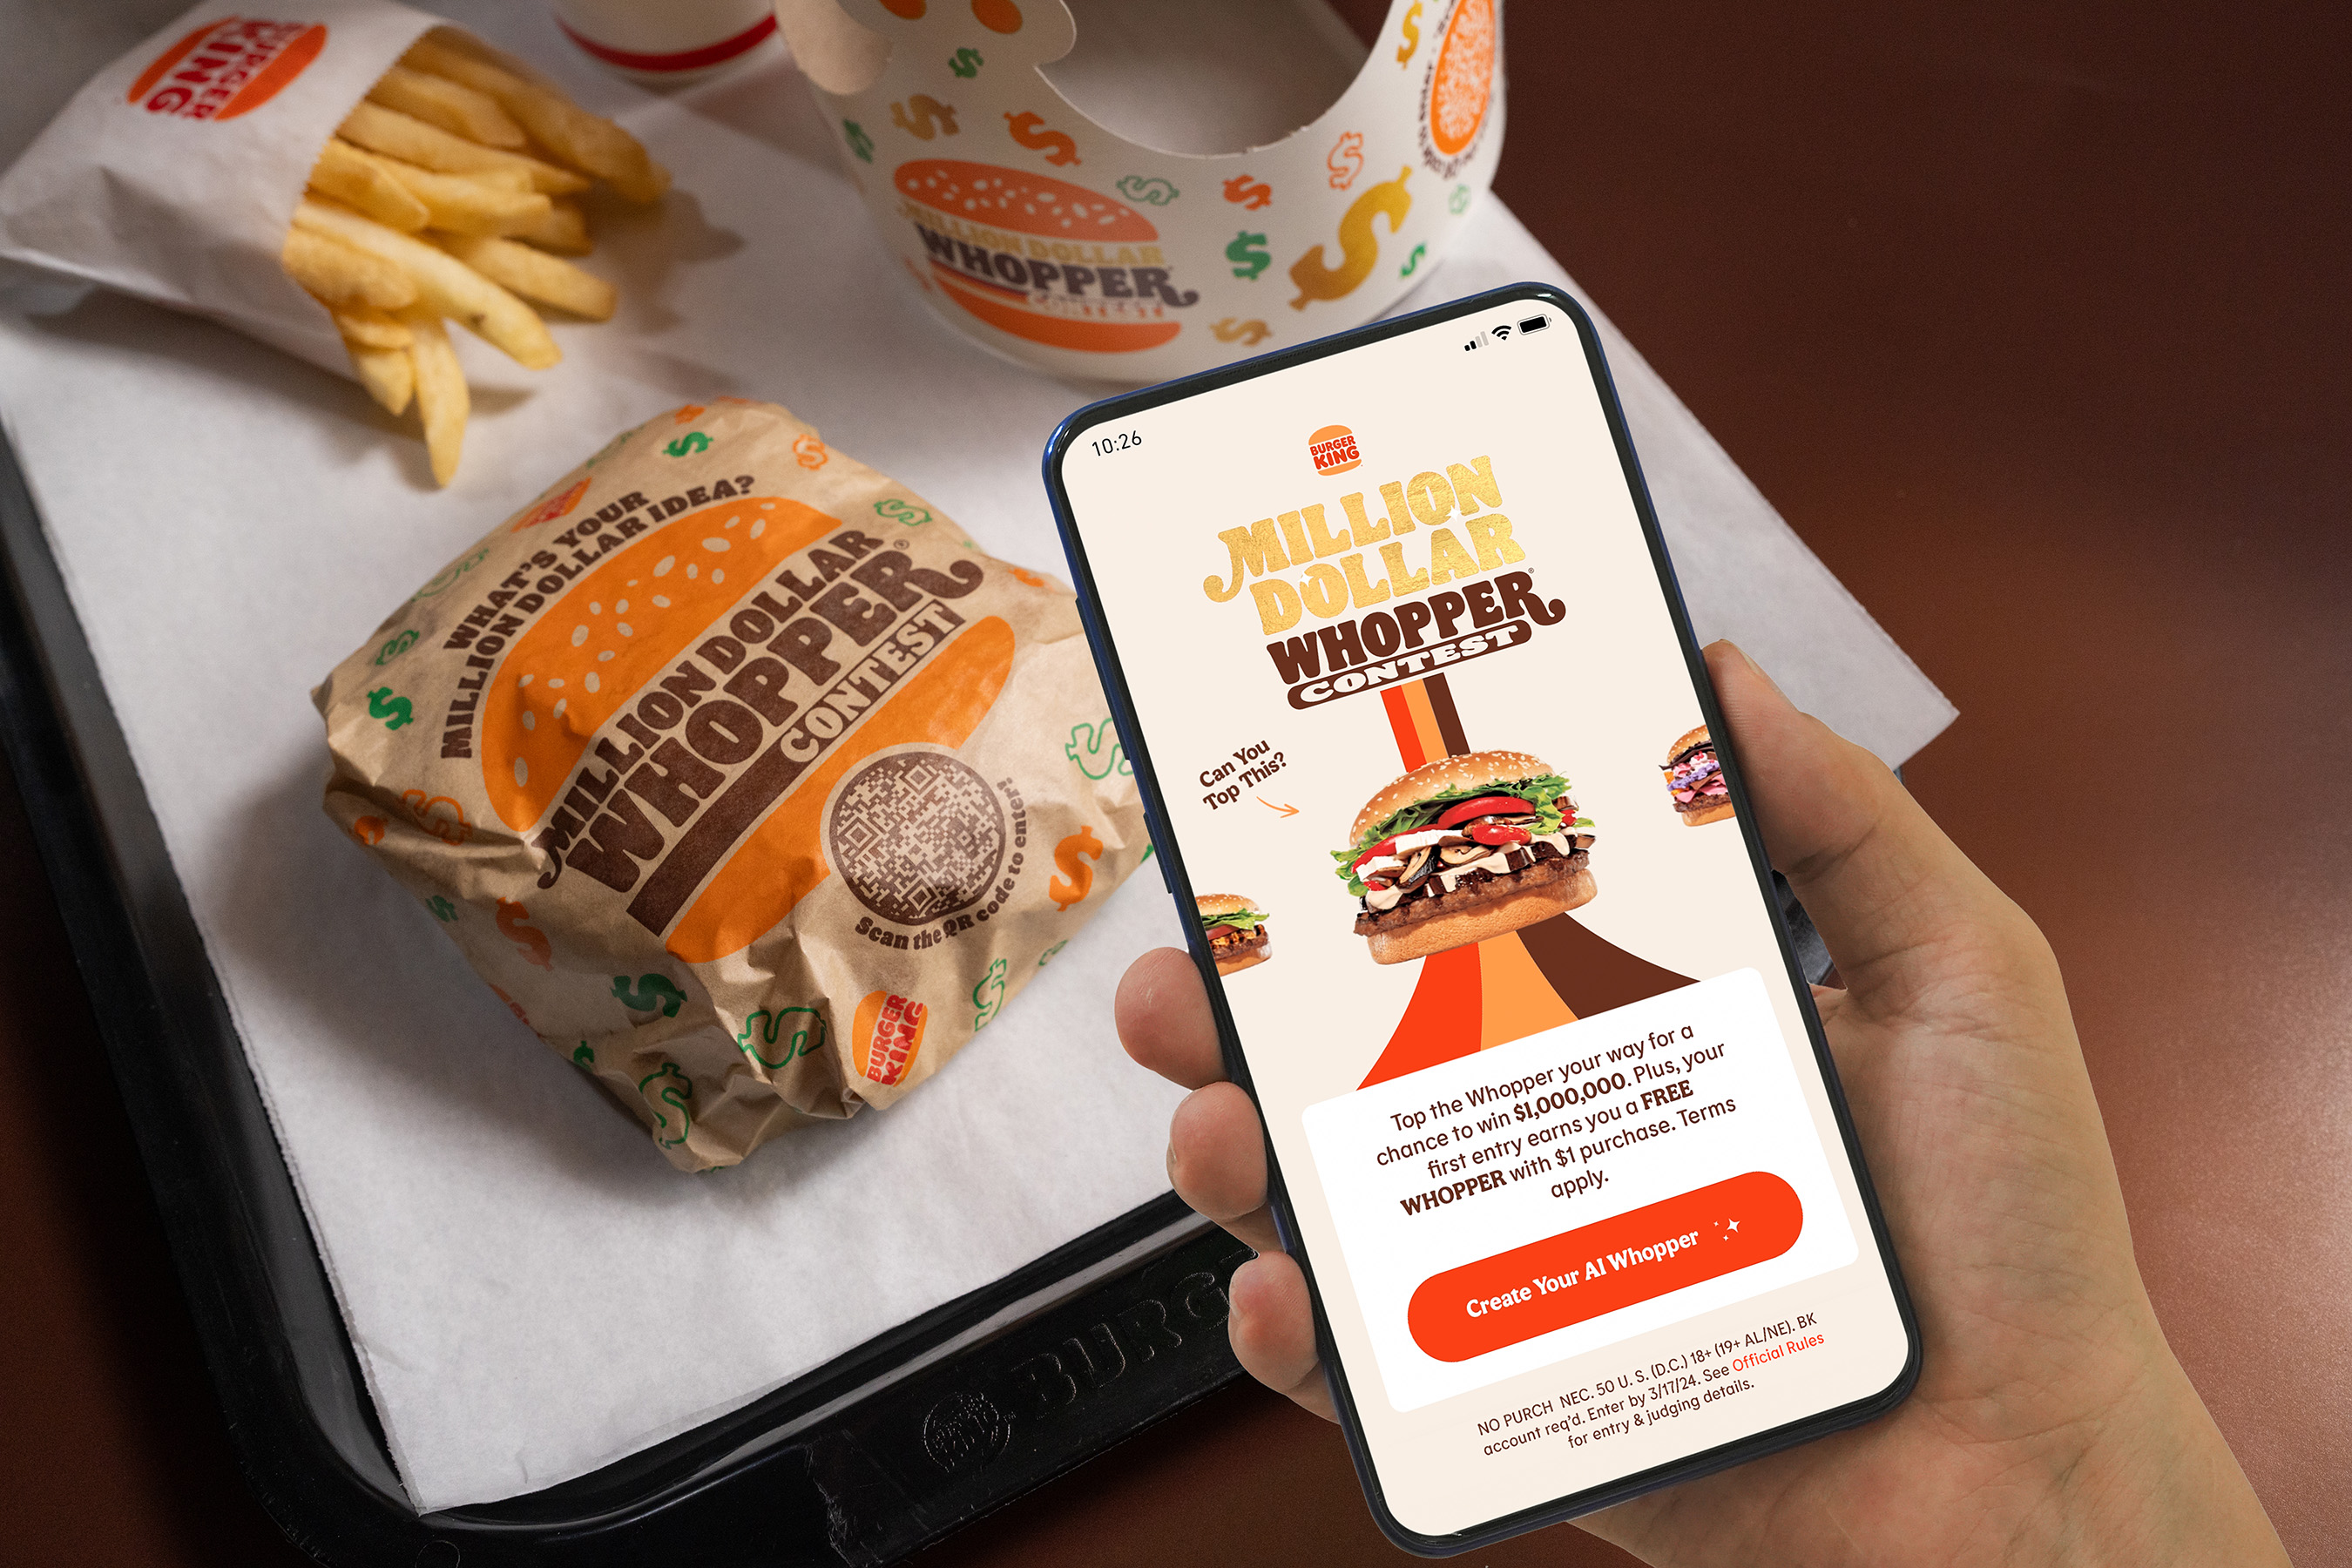 Burger King fans can visit BK.com/MDW to submit their Whopper creation now through Sunday, March 17, using their free Royal Perks account. For more information,